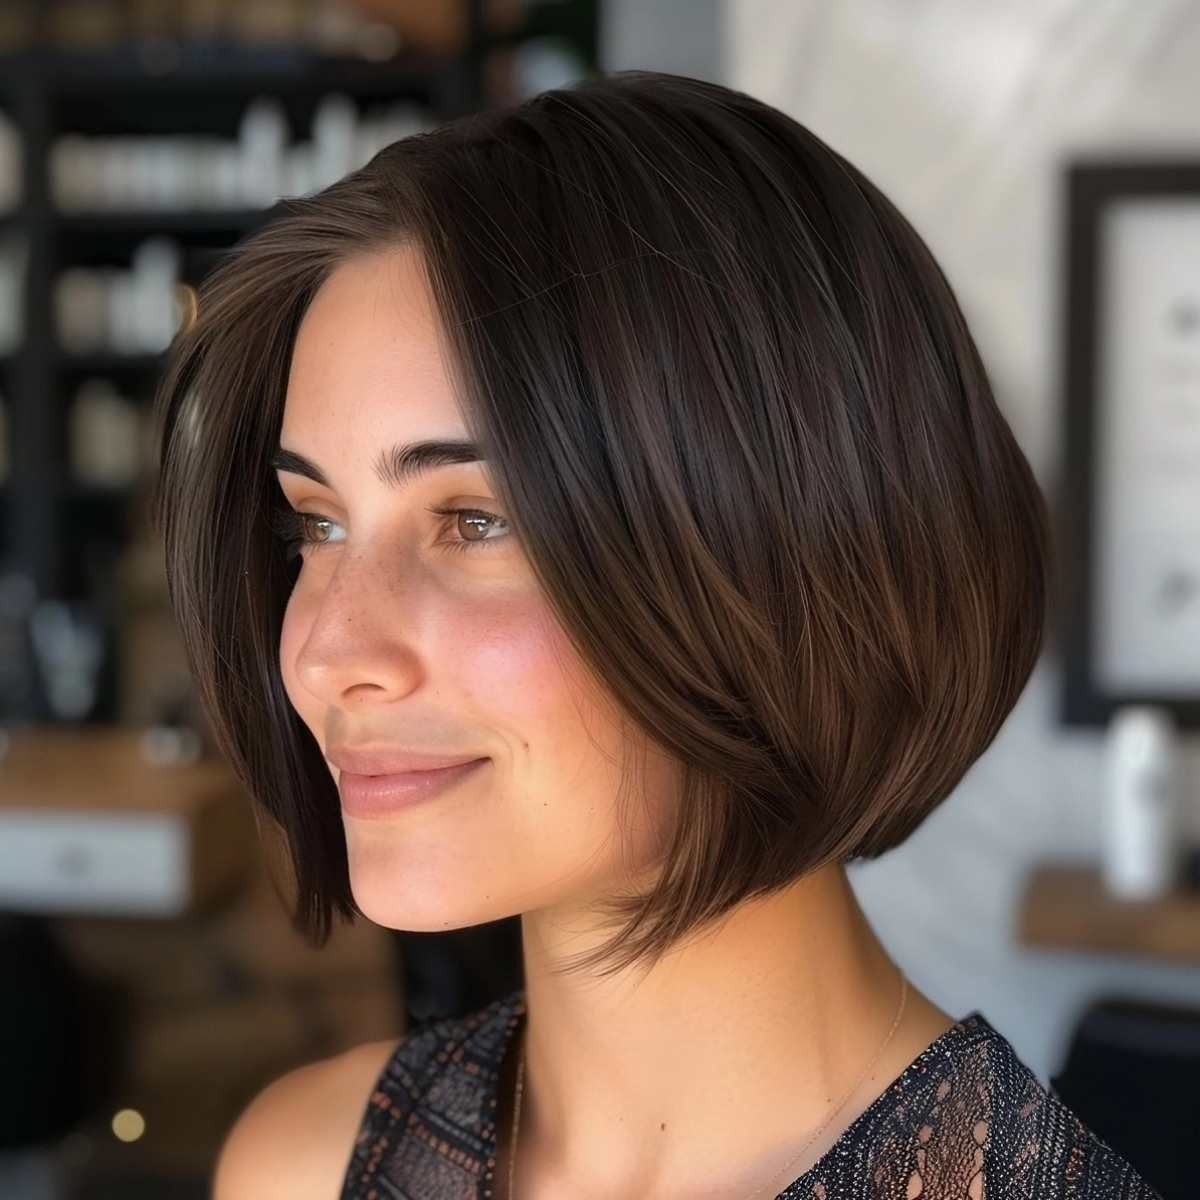 Picture of sleek yet edgy short hairstyle for long faces